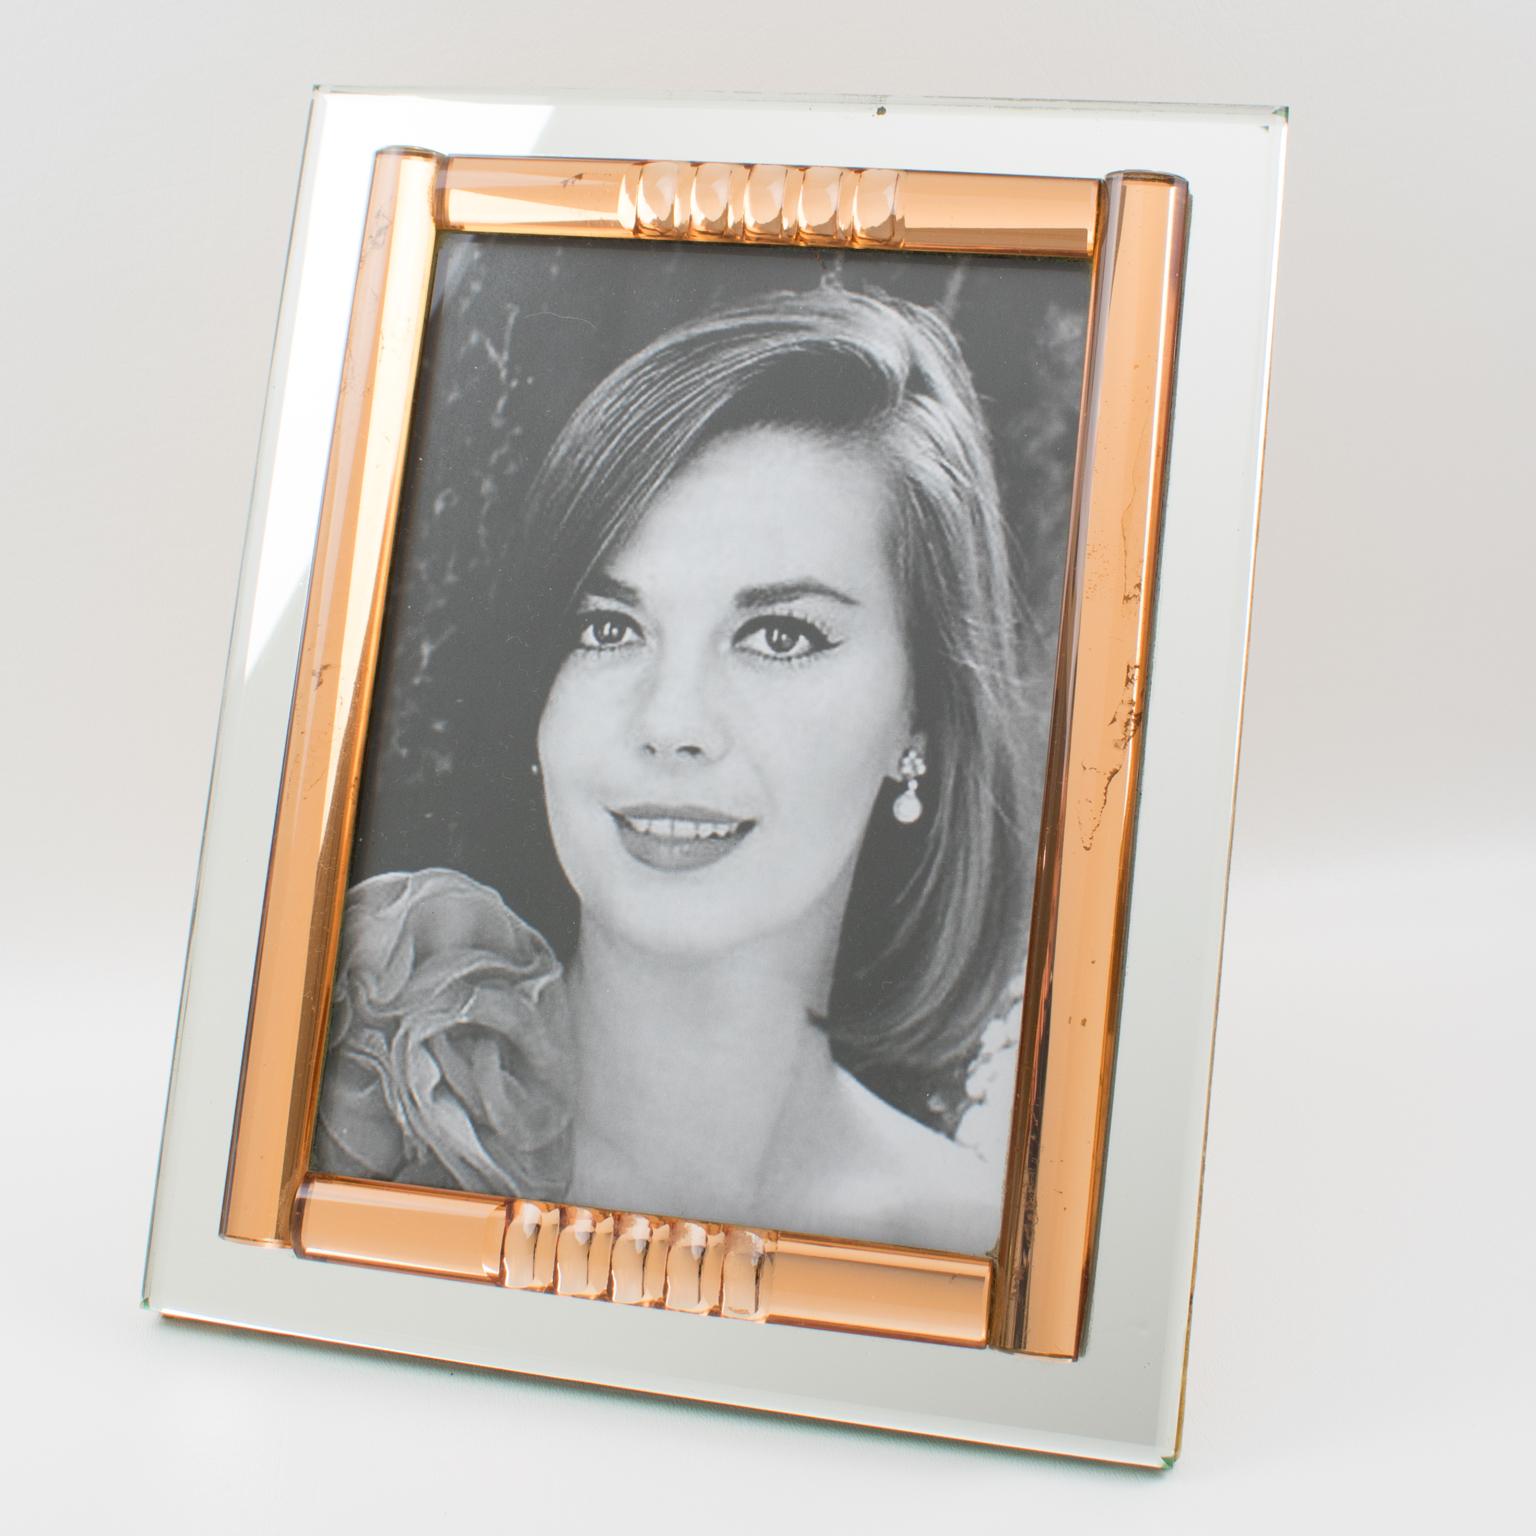 This stunning French 1940s mirror picture photo frame features a deep geometric beveling and domed sides in lovely copper or peach pink color complimented with silver mirrored glass. The frame can be displayed either in a portrait or landscape